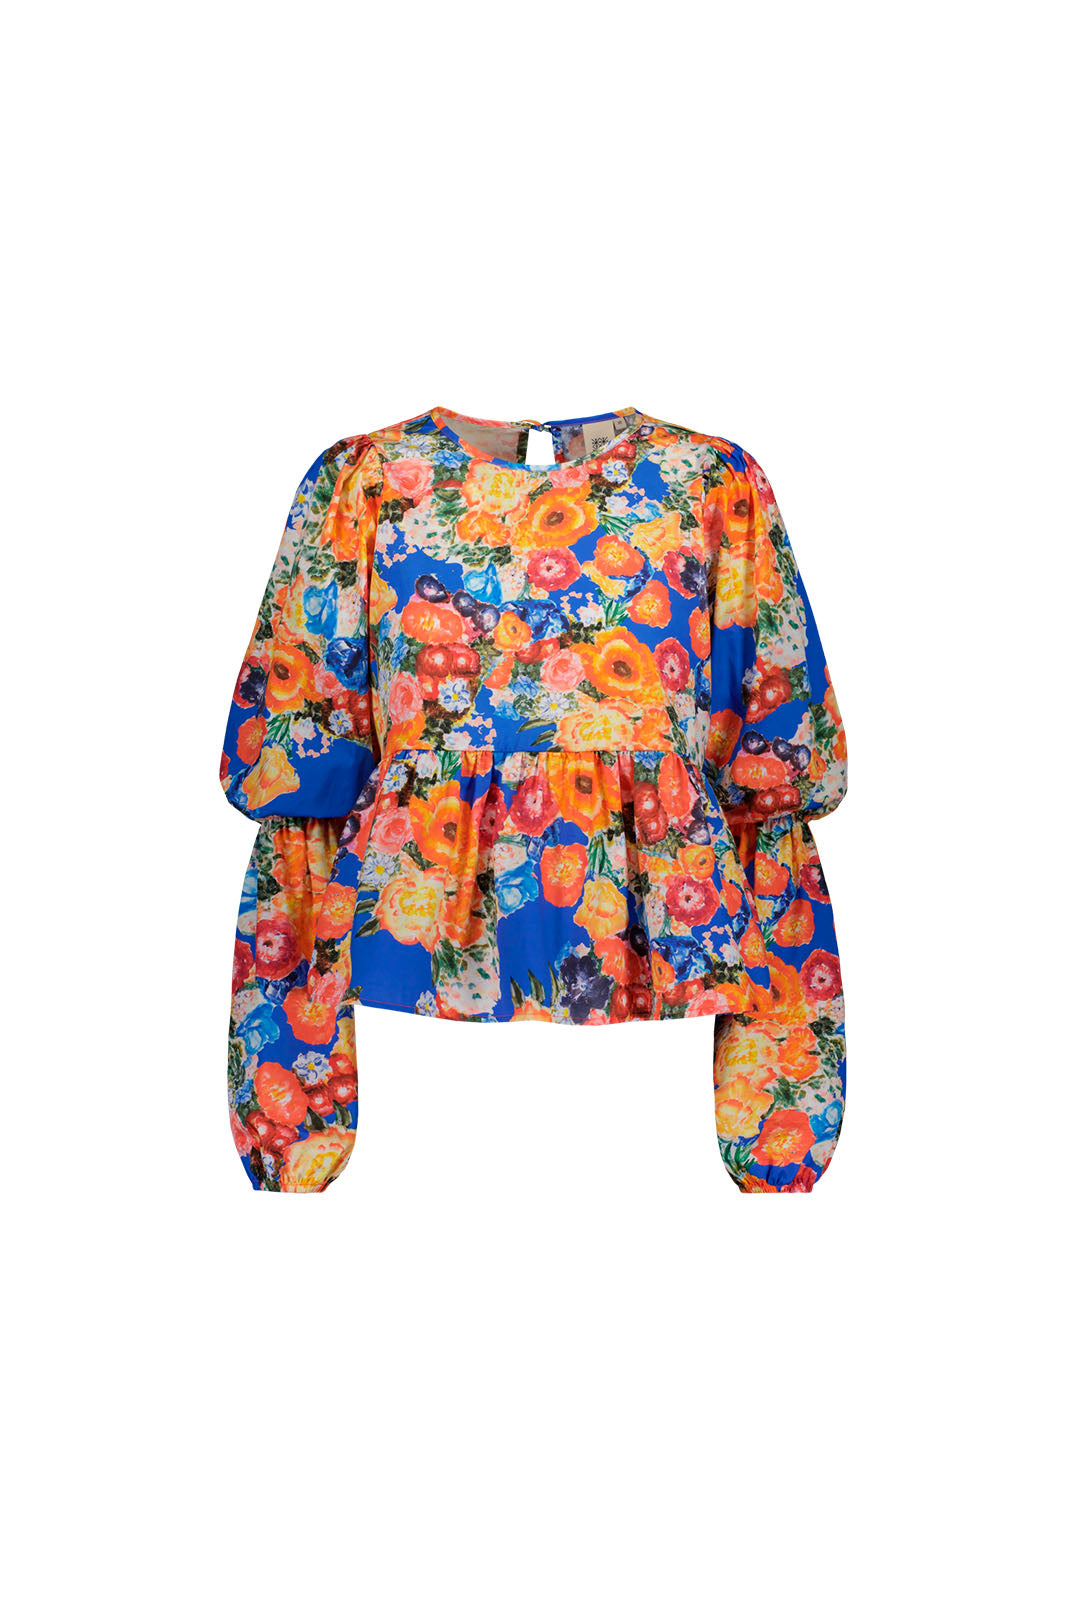 Double Puff Blouse, Marigold